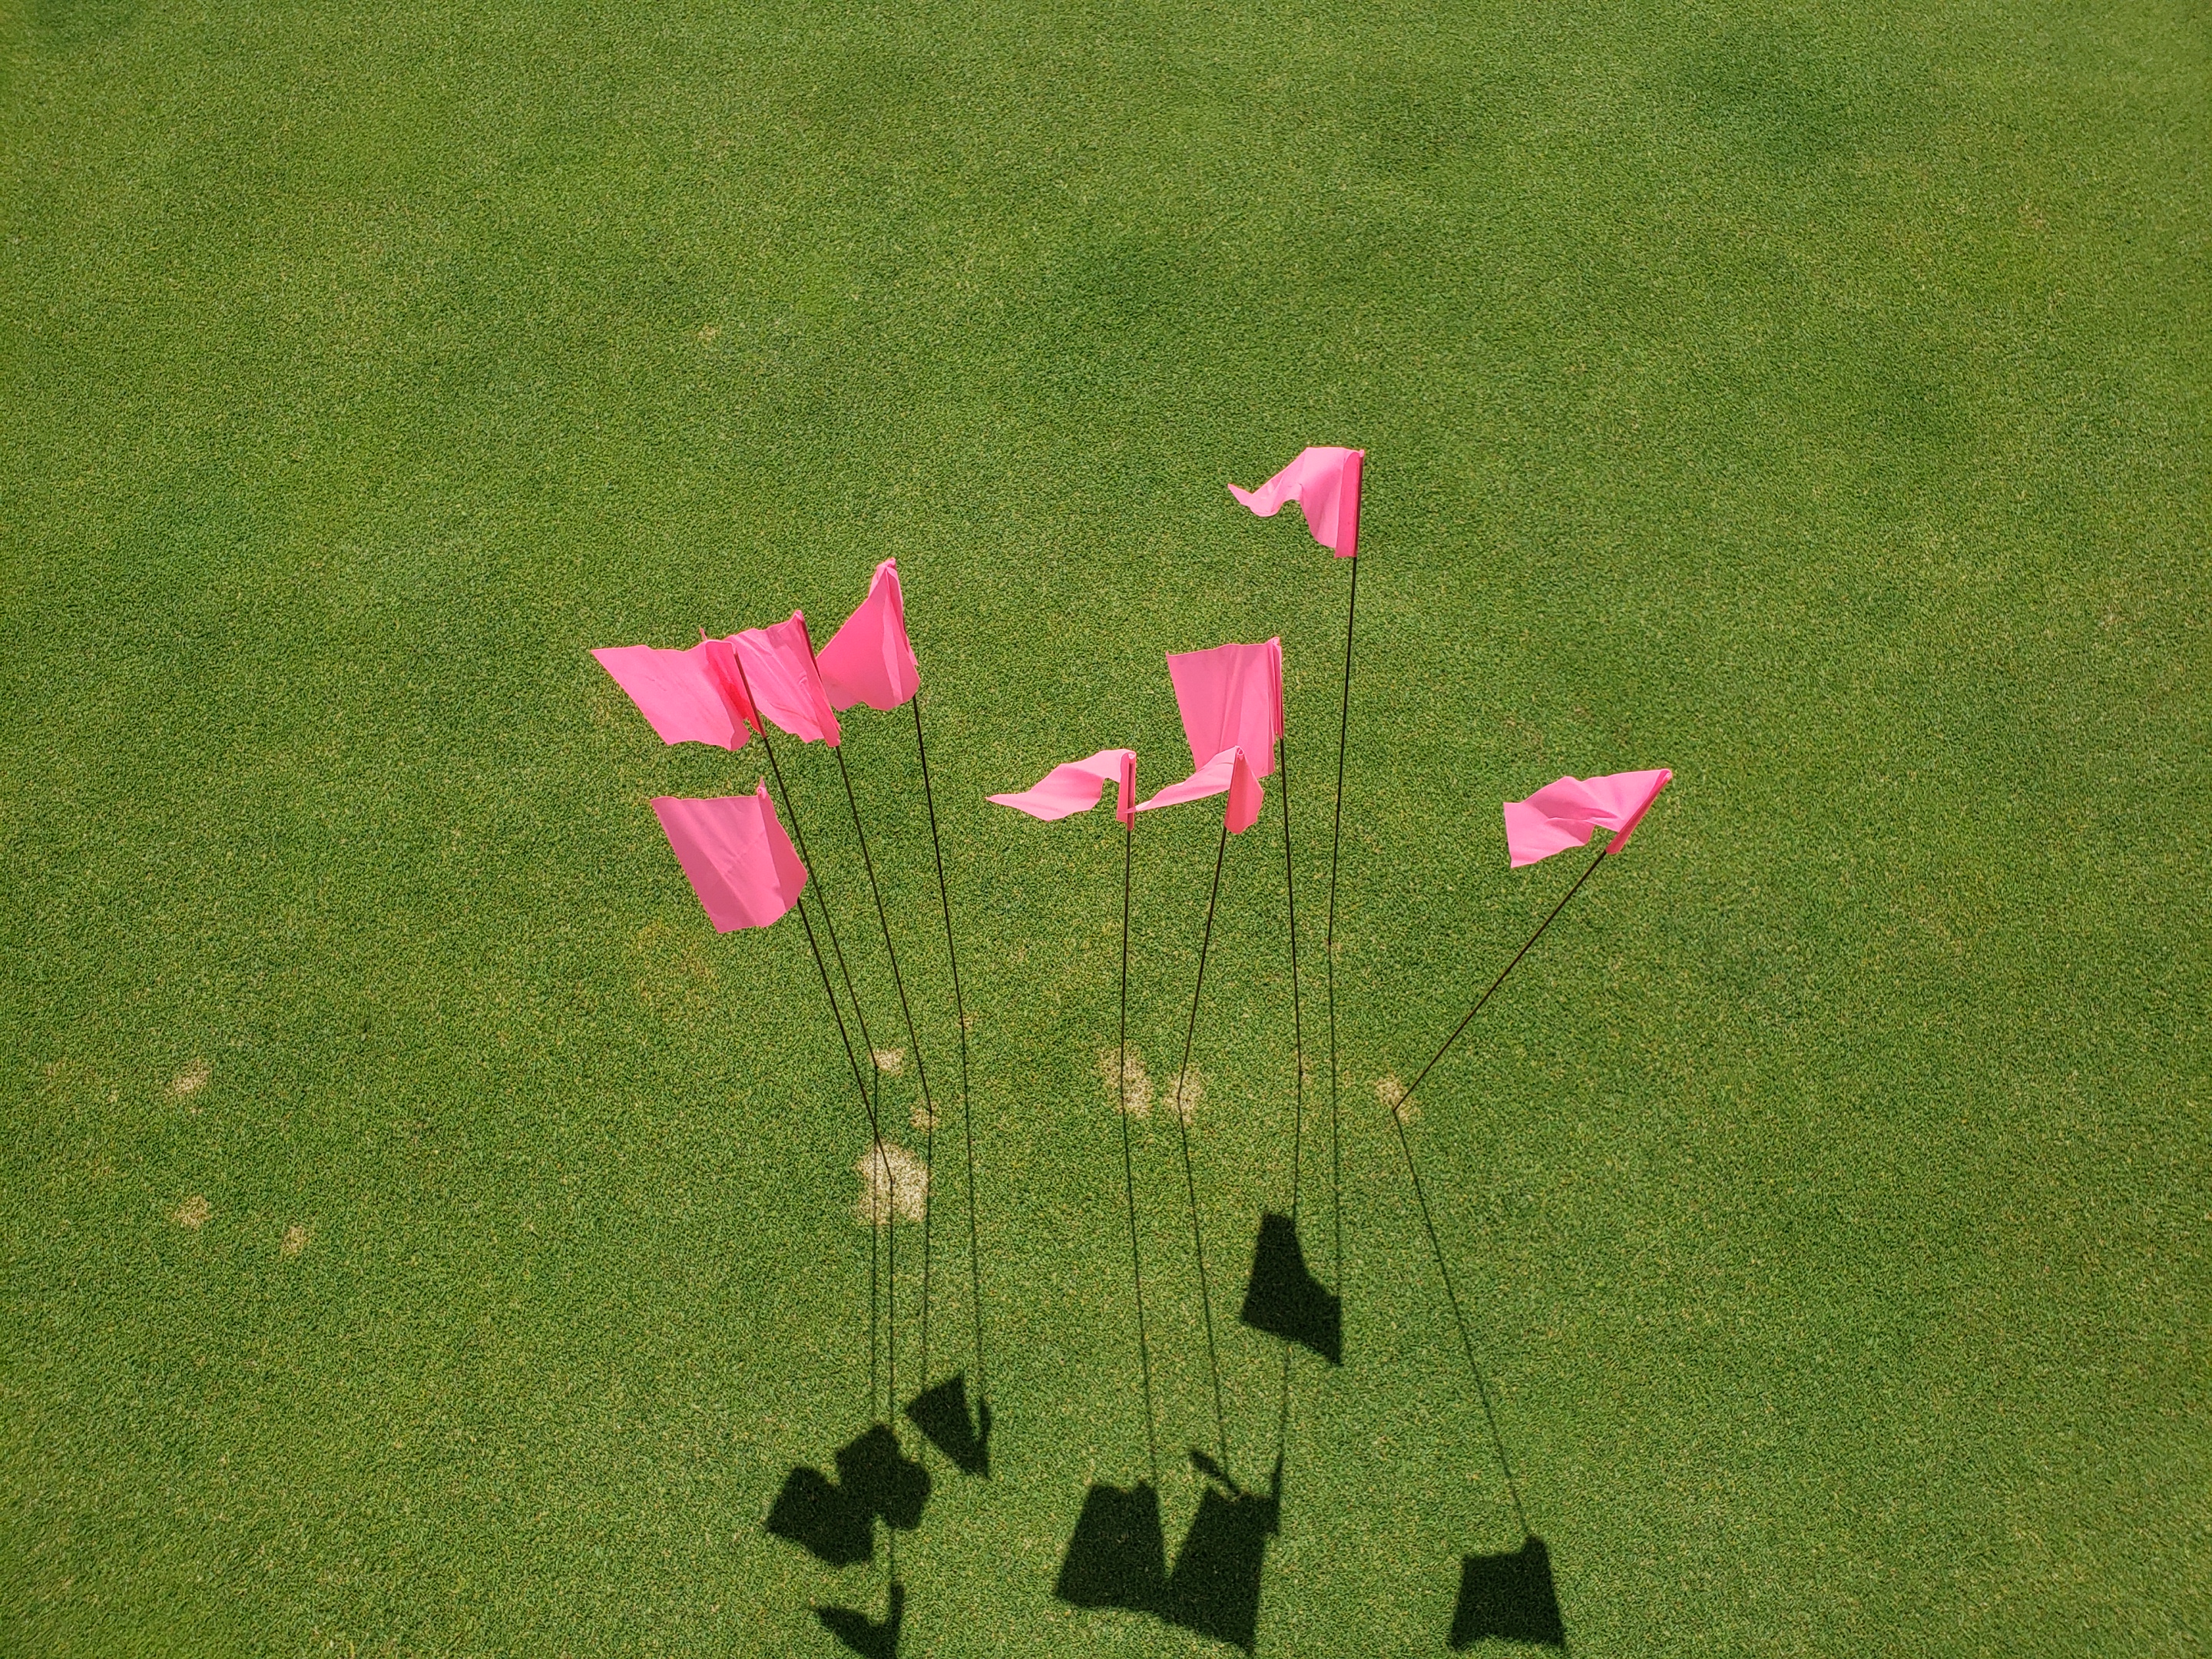 Figure shows pink flowers with grass in the background